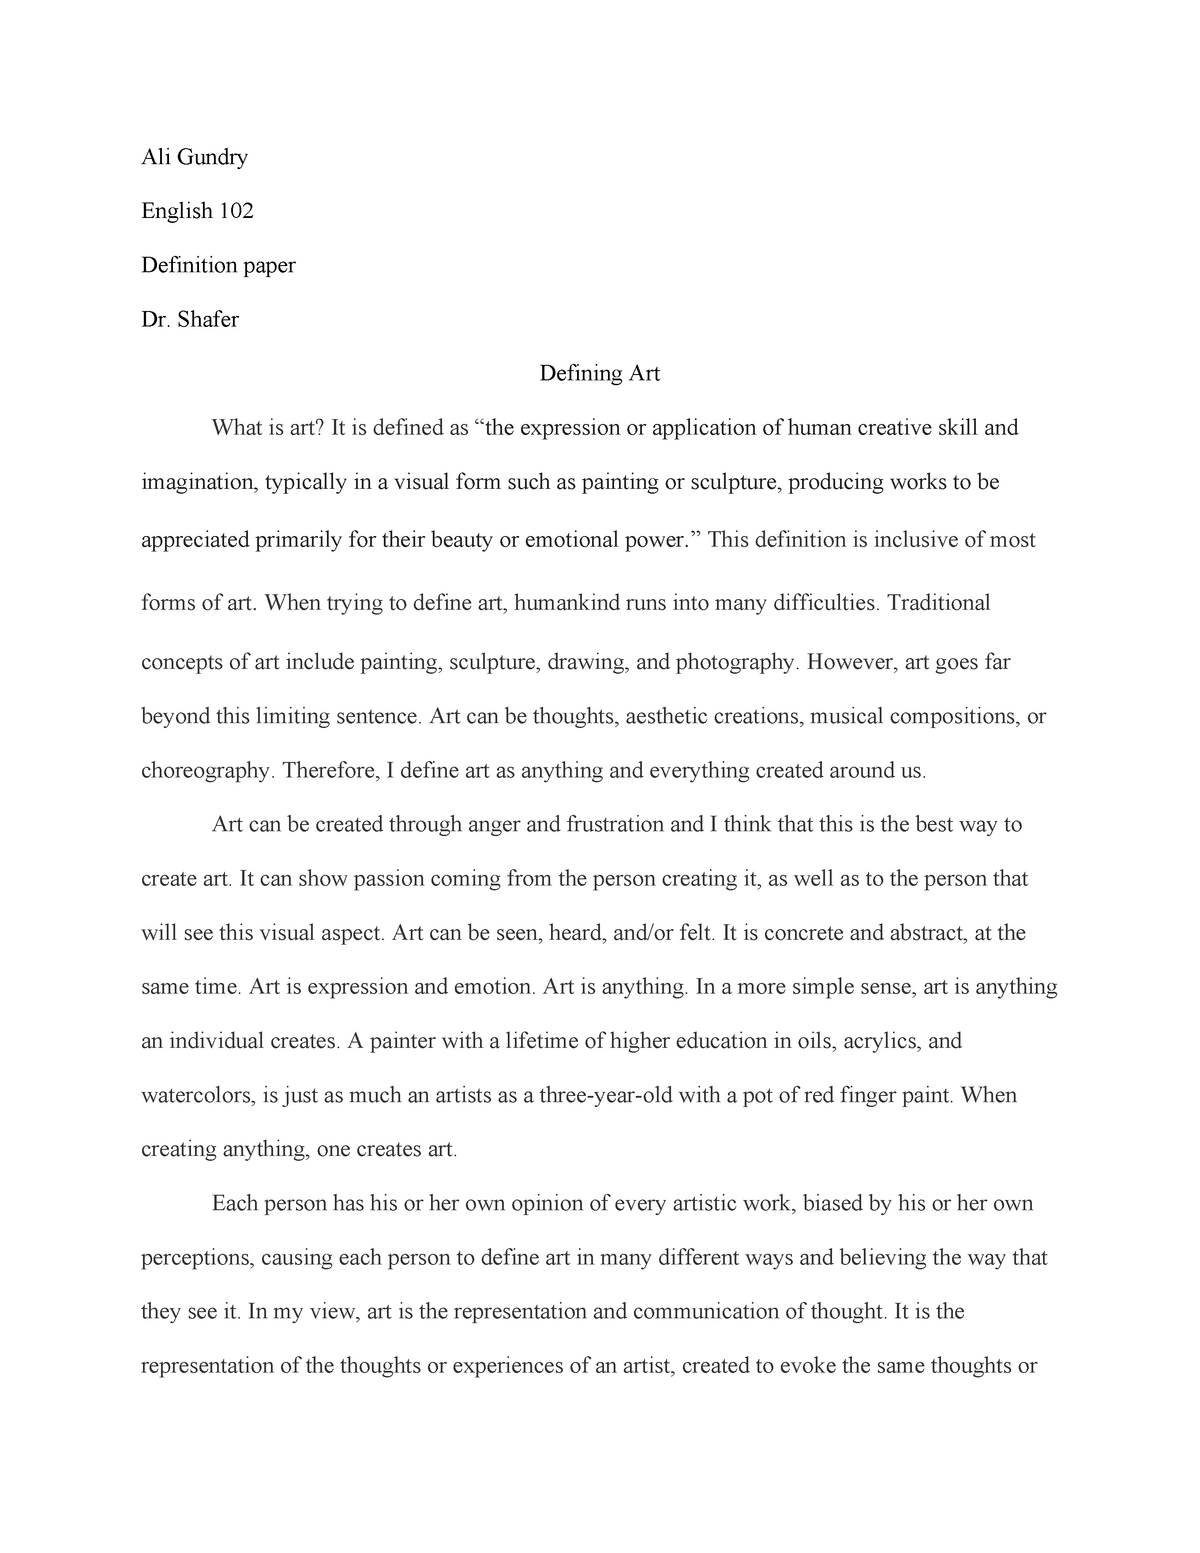 what is your definition of art essay